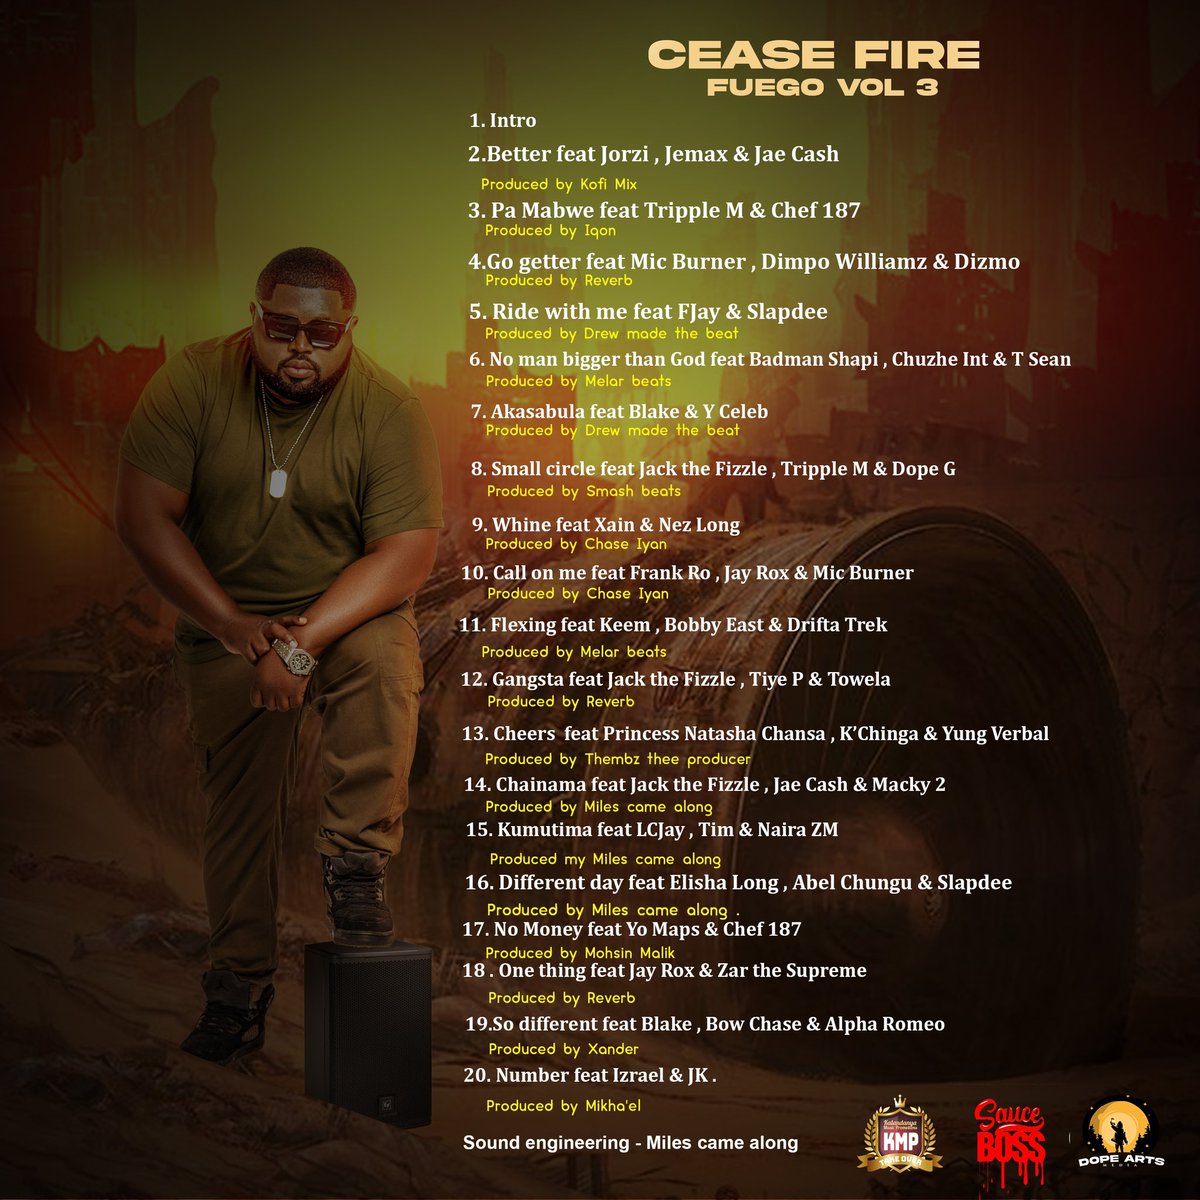 Out tonight at Midnight #CeaseFire #Fuego3 #WeMoveWithGod